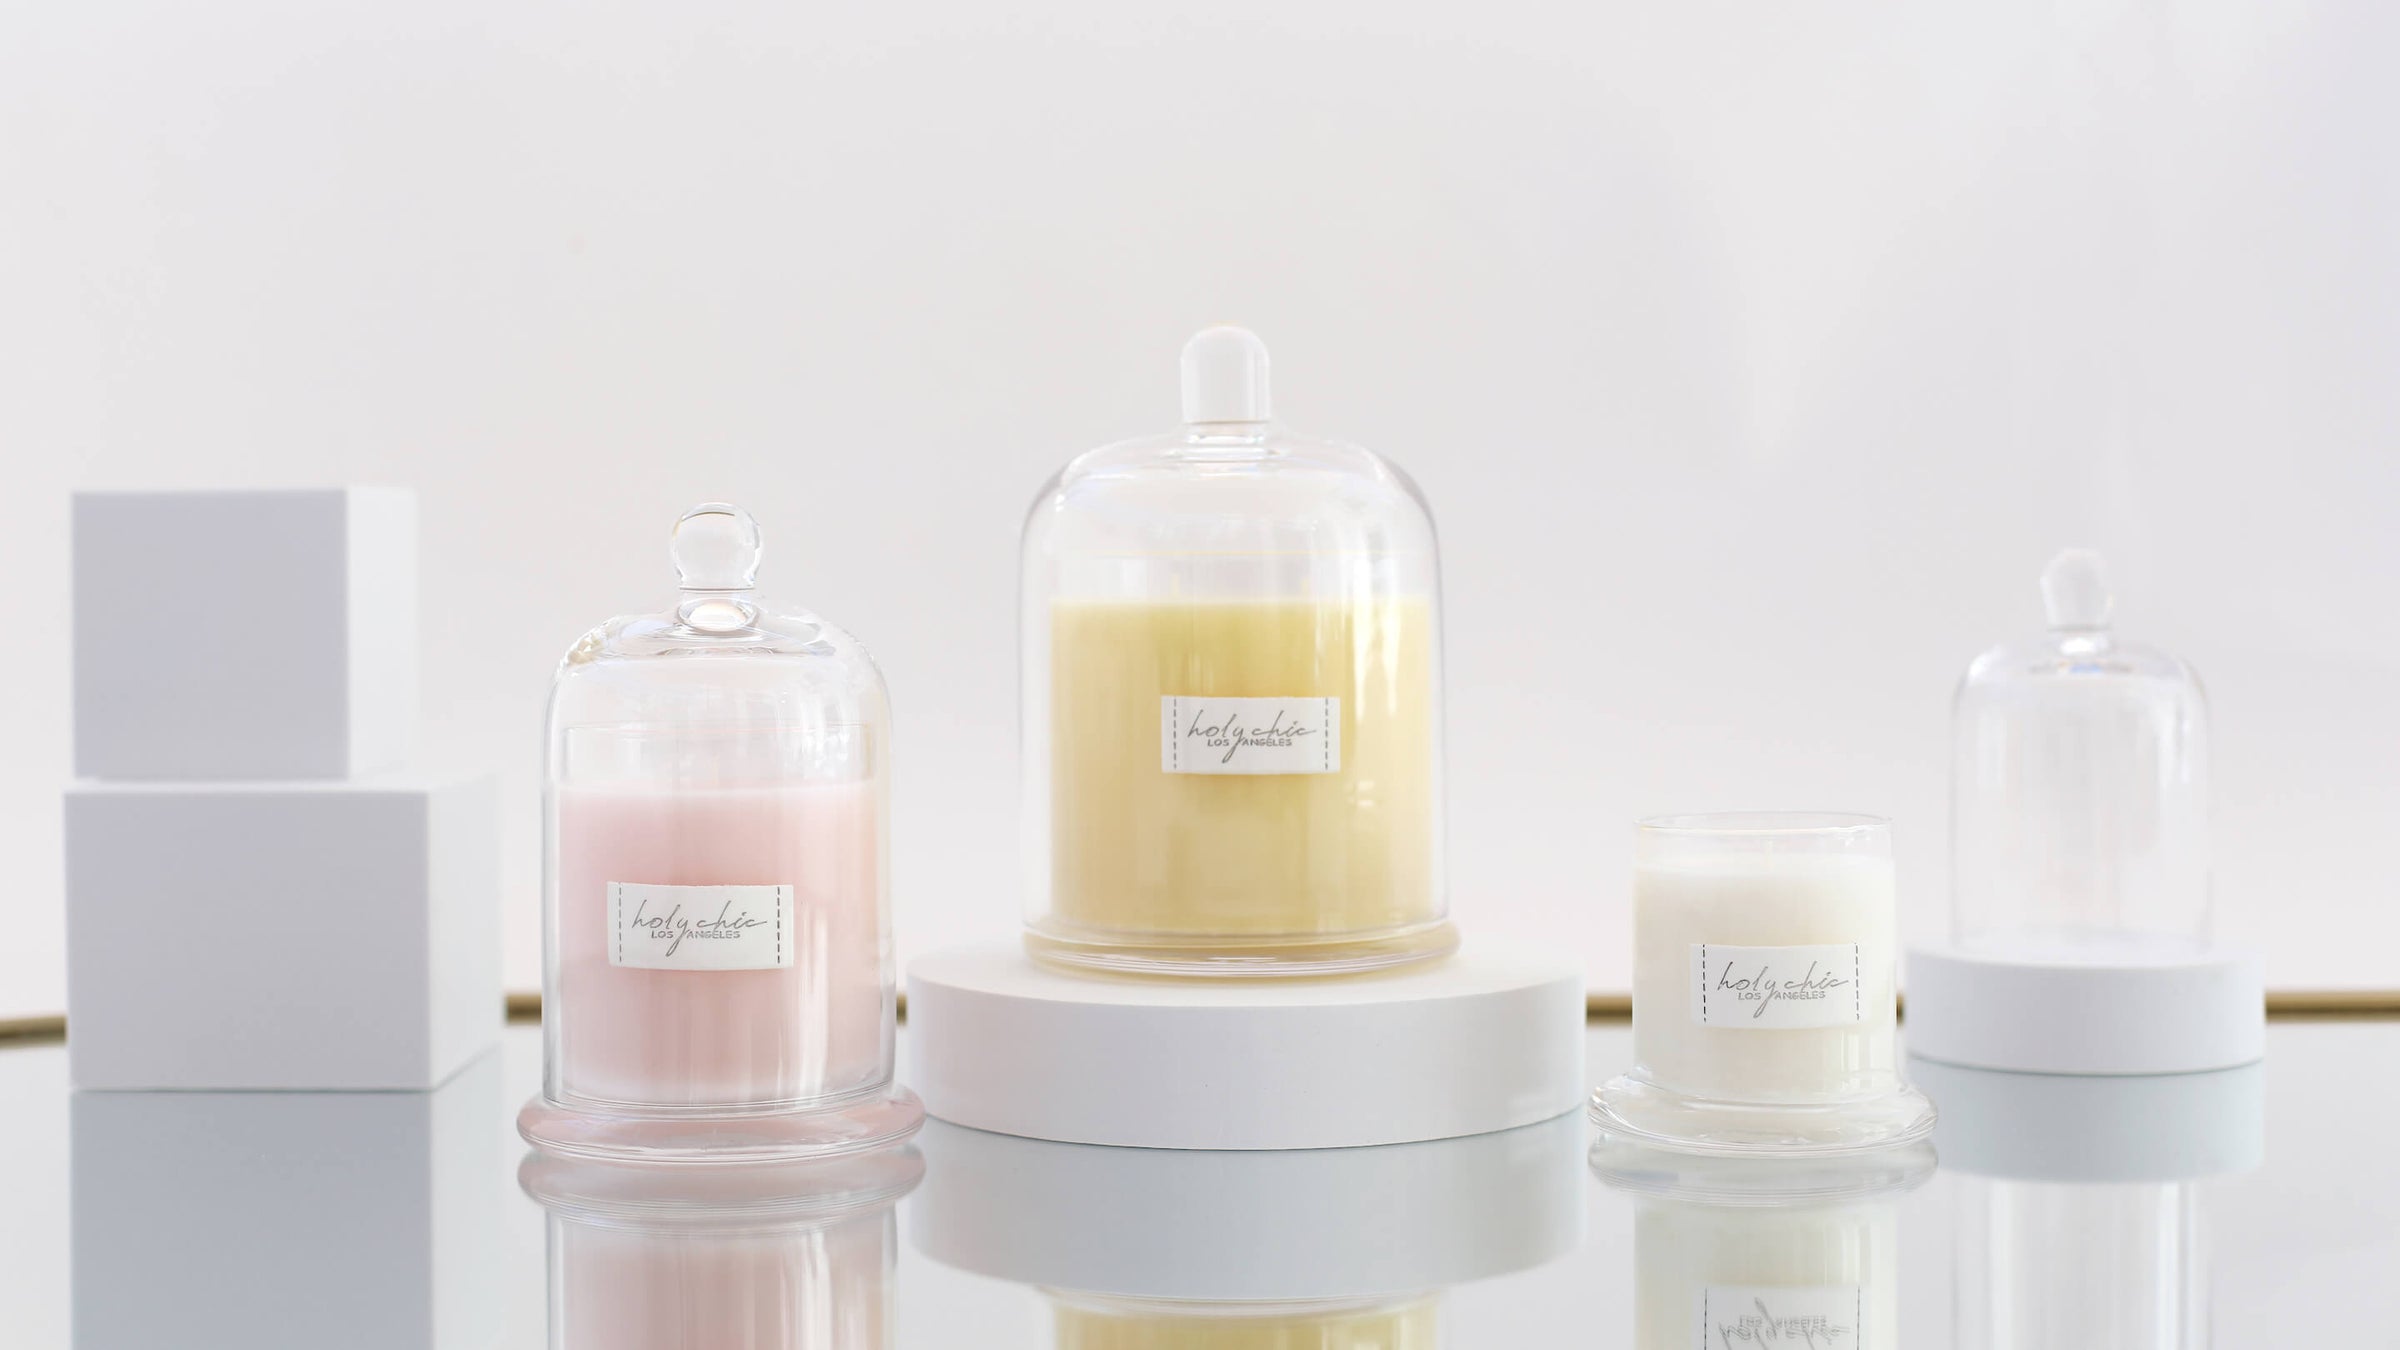 Scented candles in a clear glass containers with a cloche